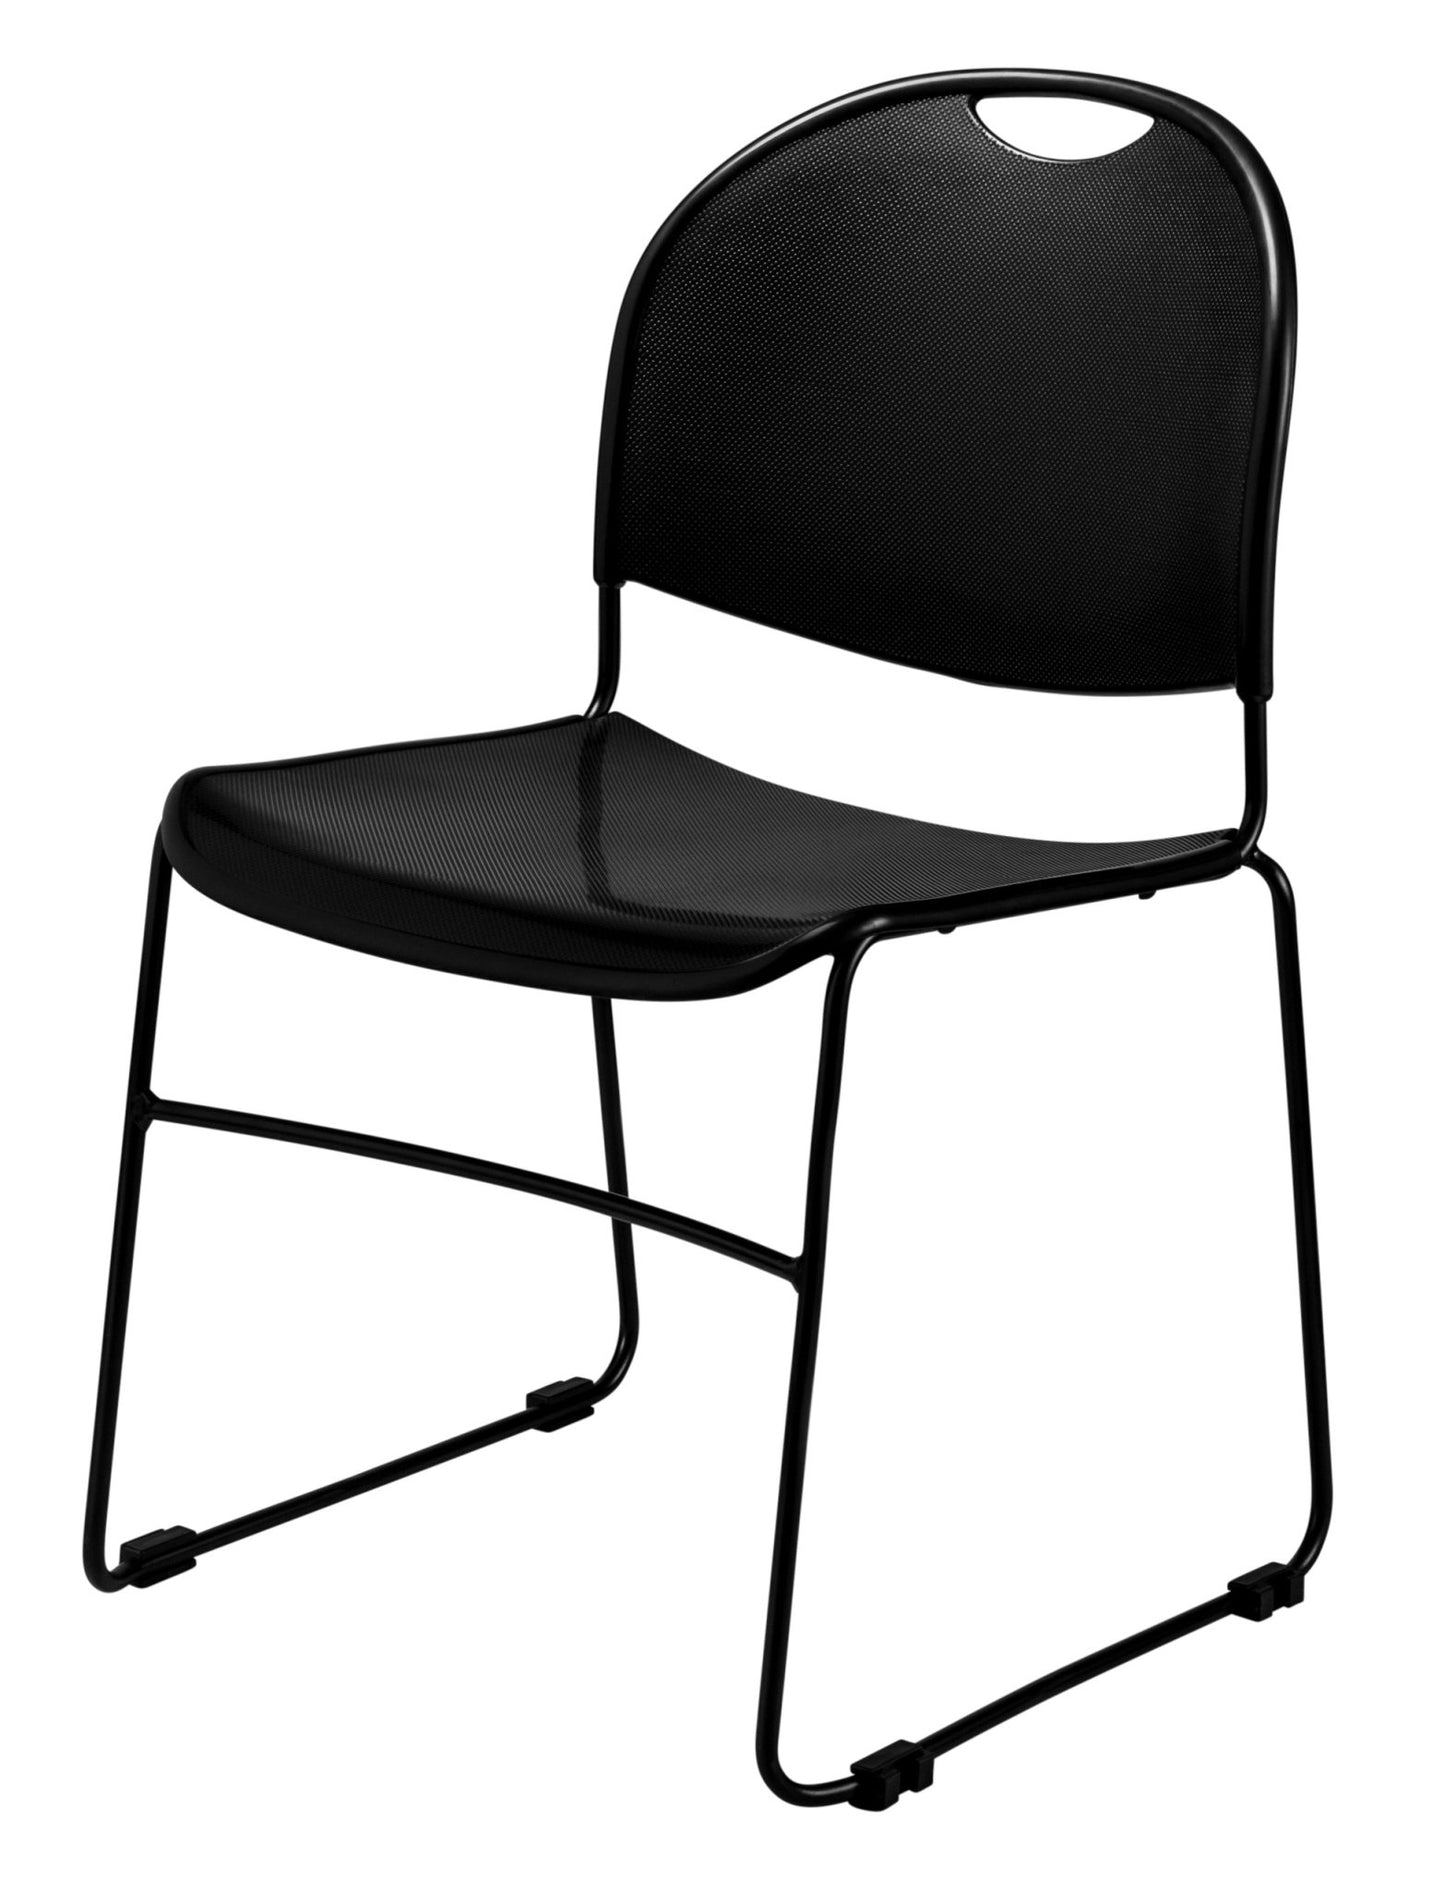 NPS 850 Series Commercialine Multi-purpose Ultra Compact Stack Chair (National Public Seating NPS-850) - SchoolOutlet